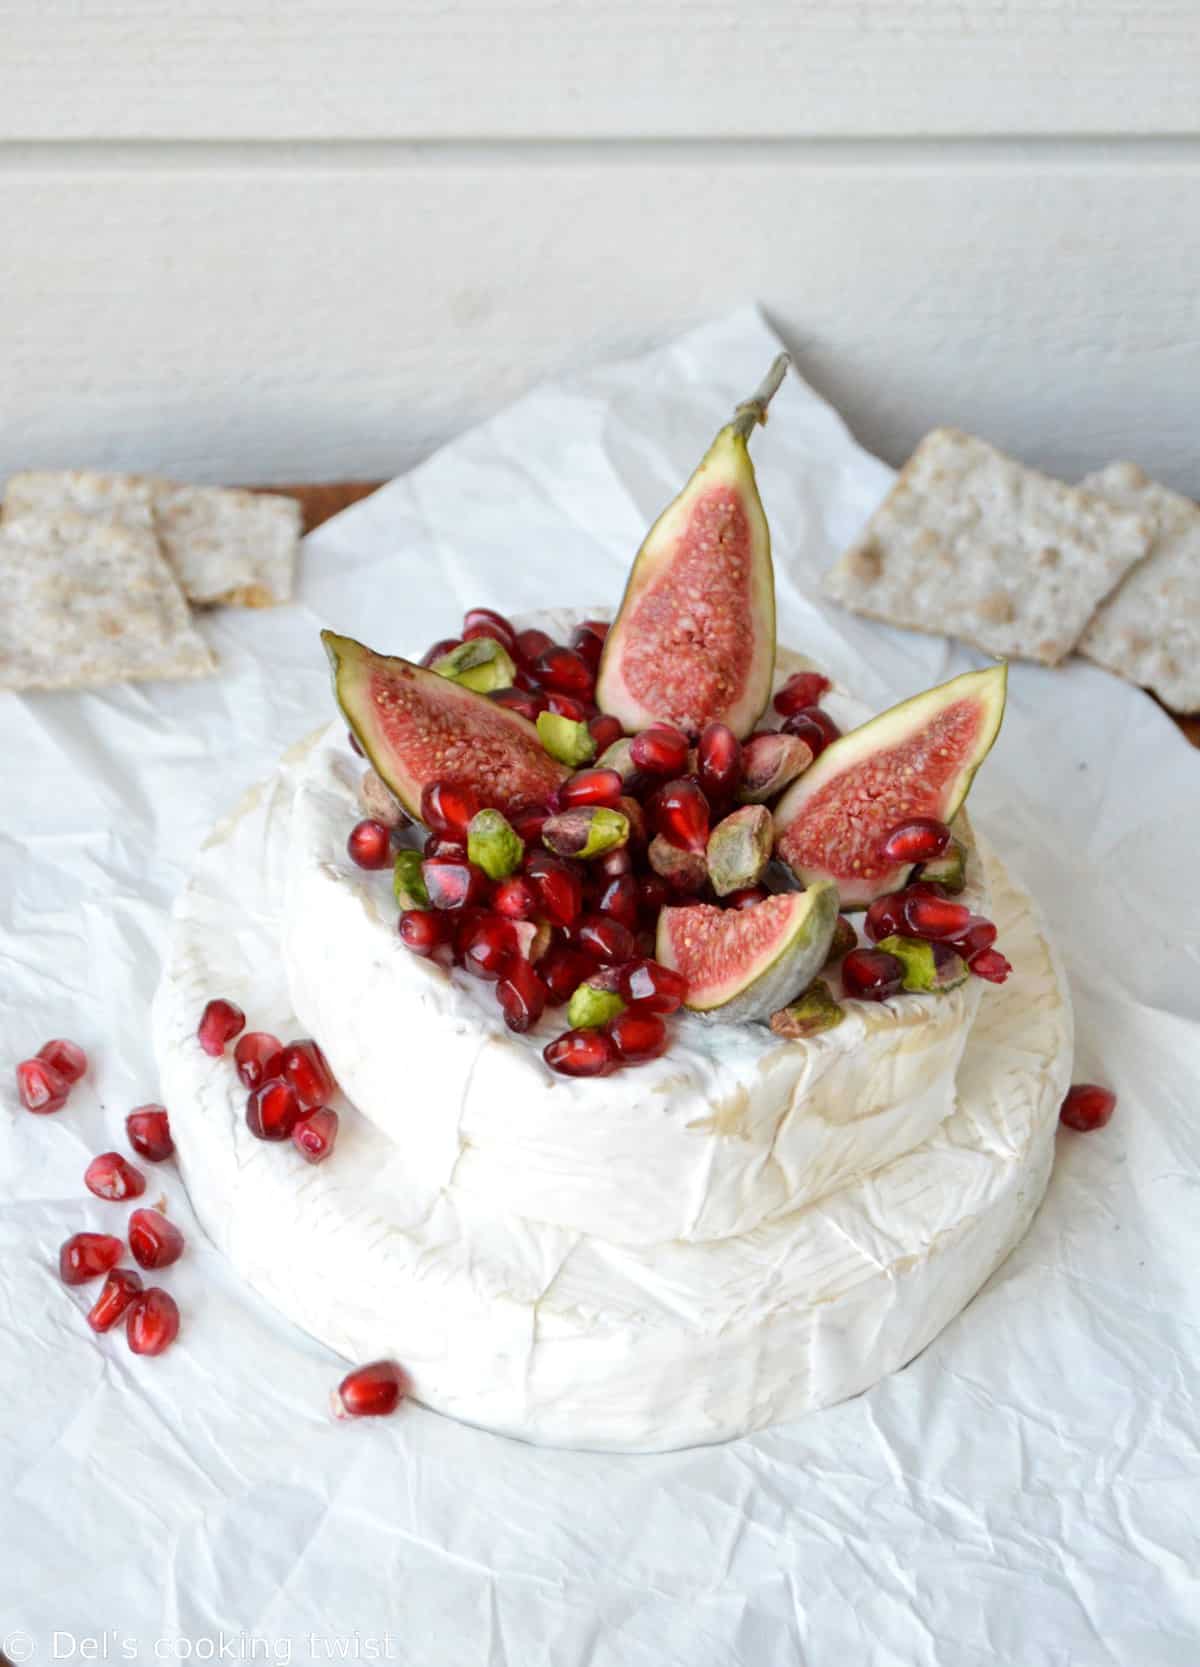 Baked Camembert with Pomegranate and Pistachios